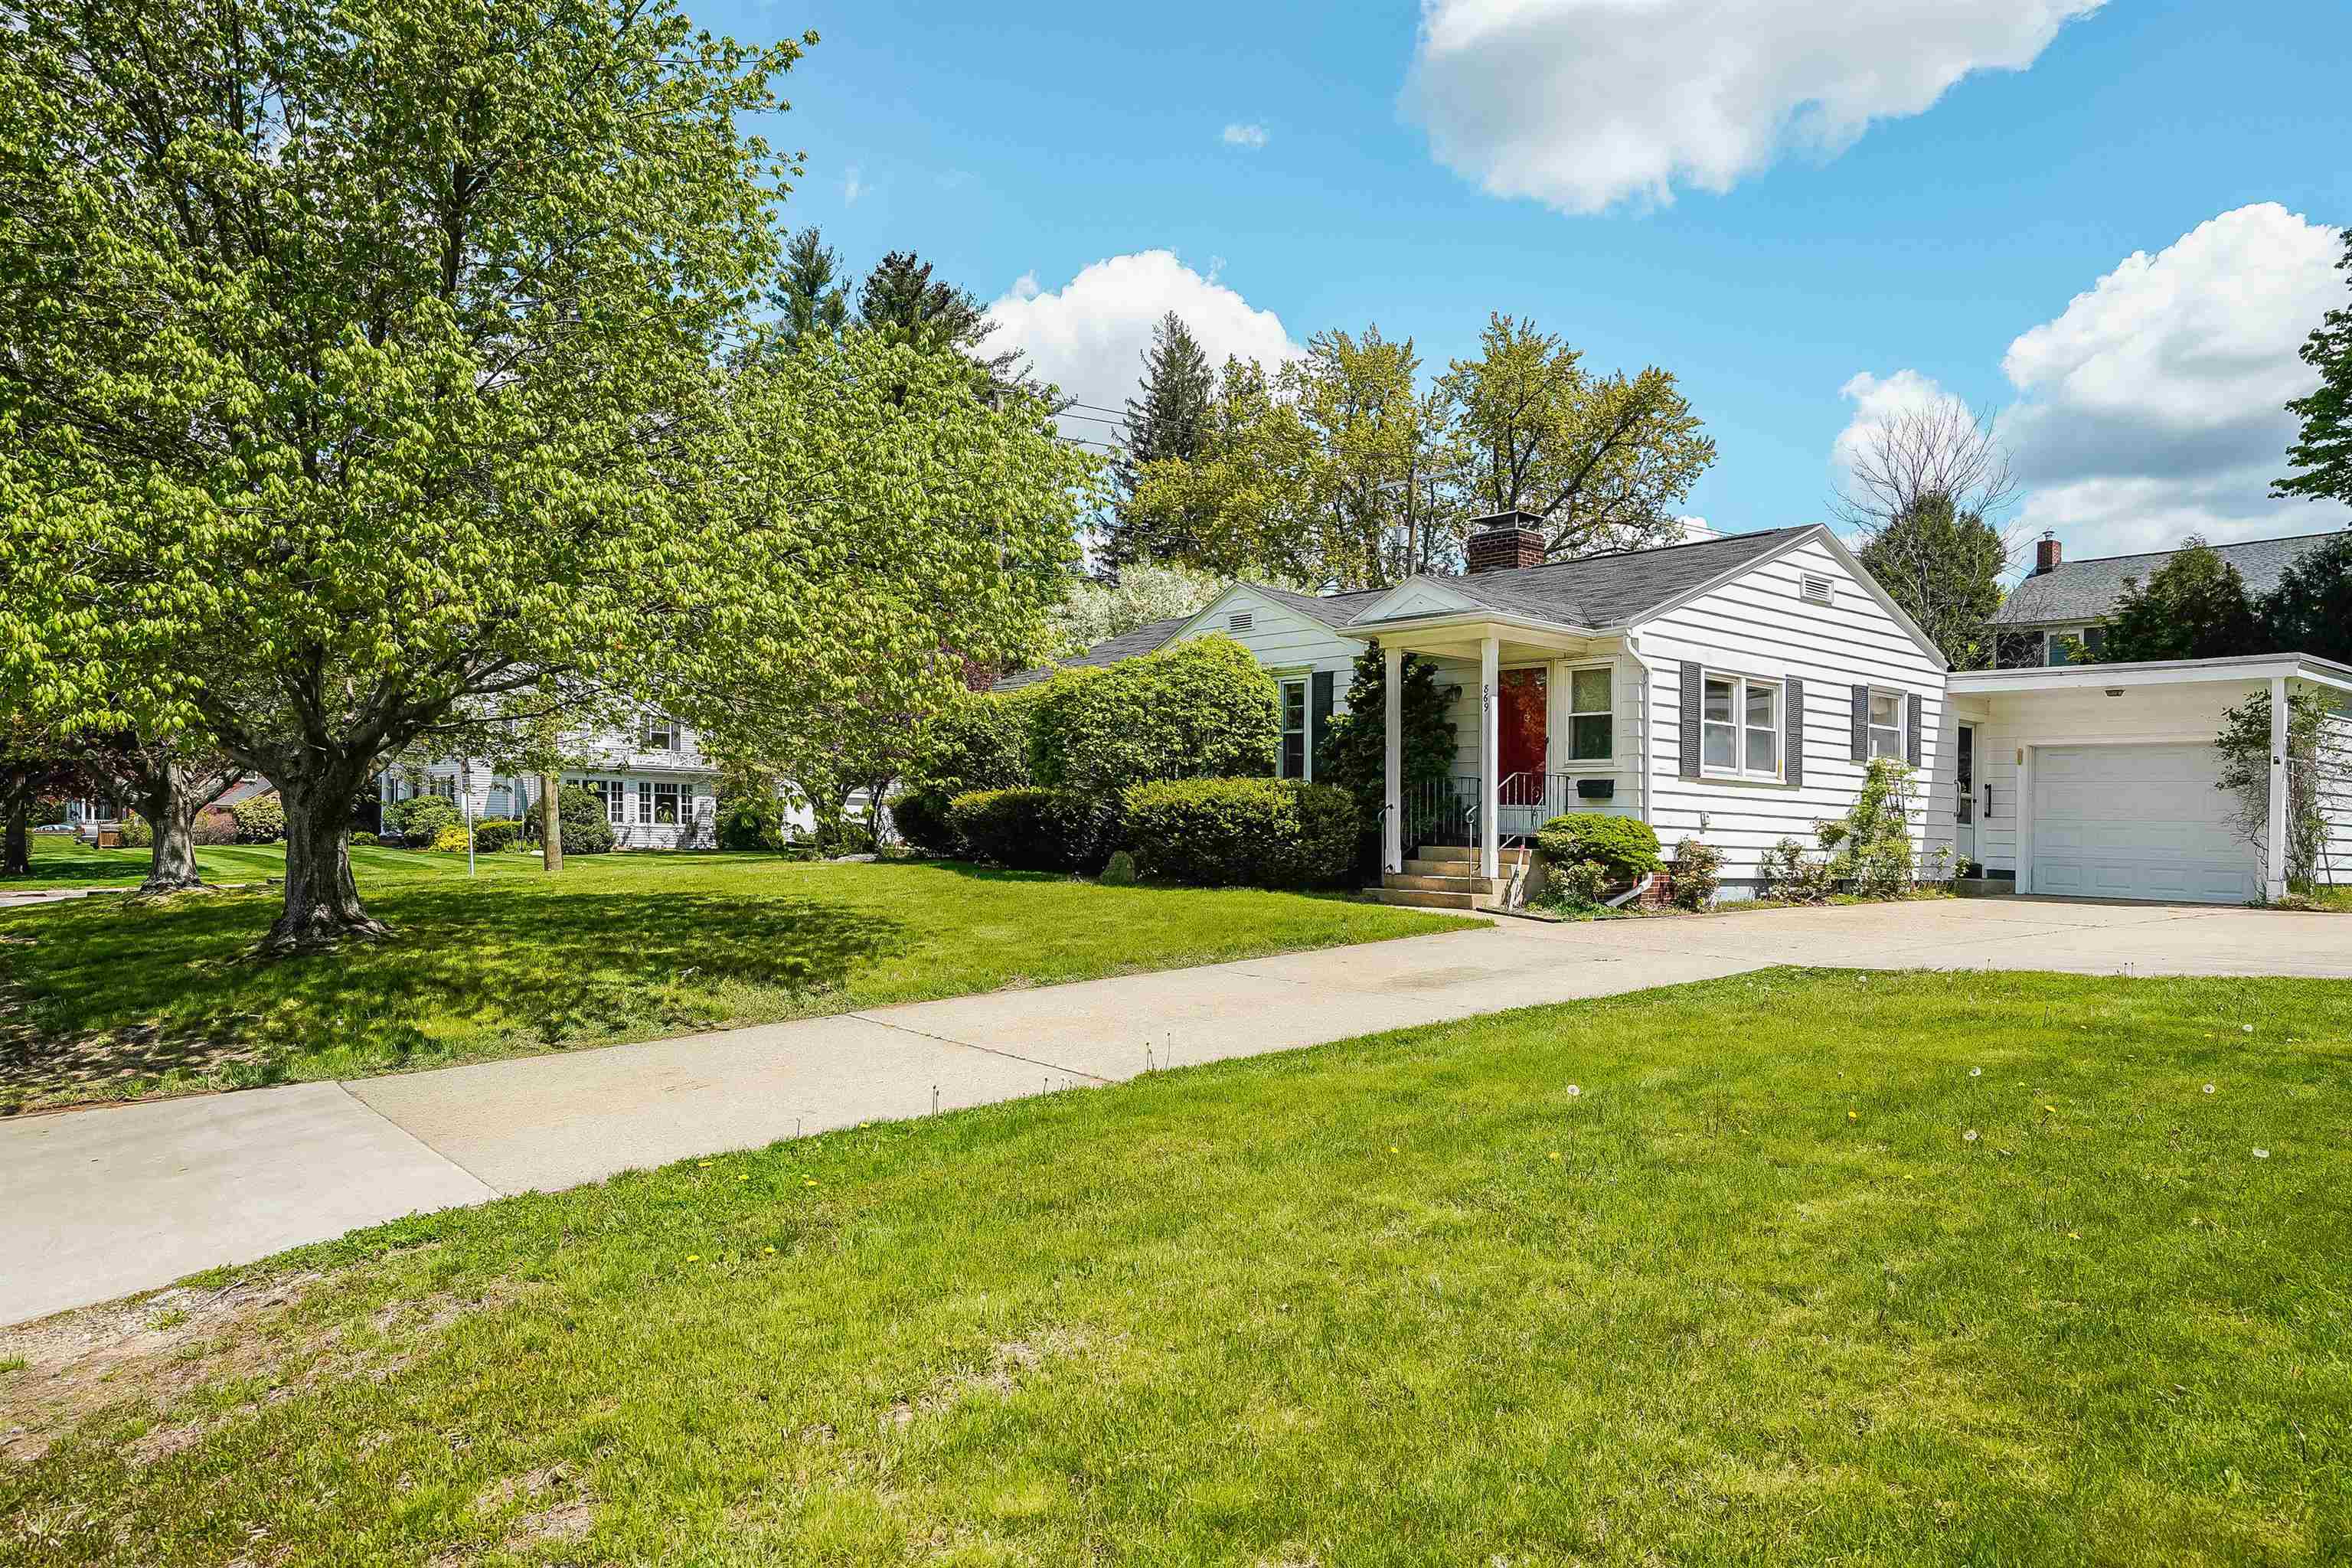 MANCHESTER NH Homes for sale